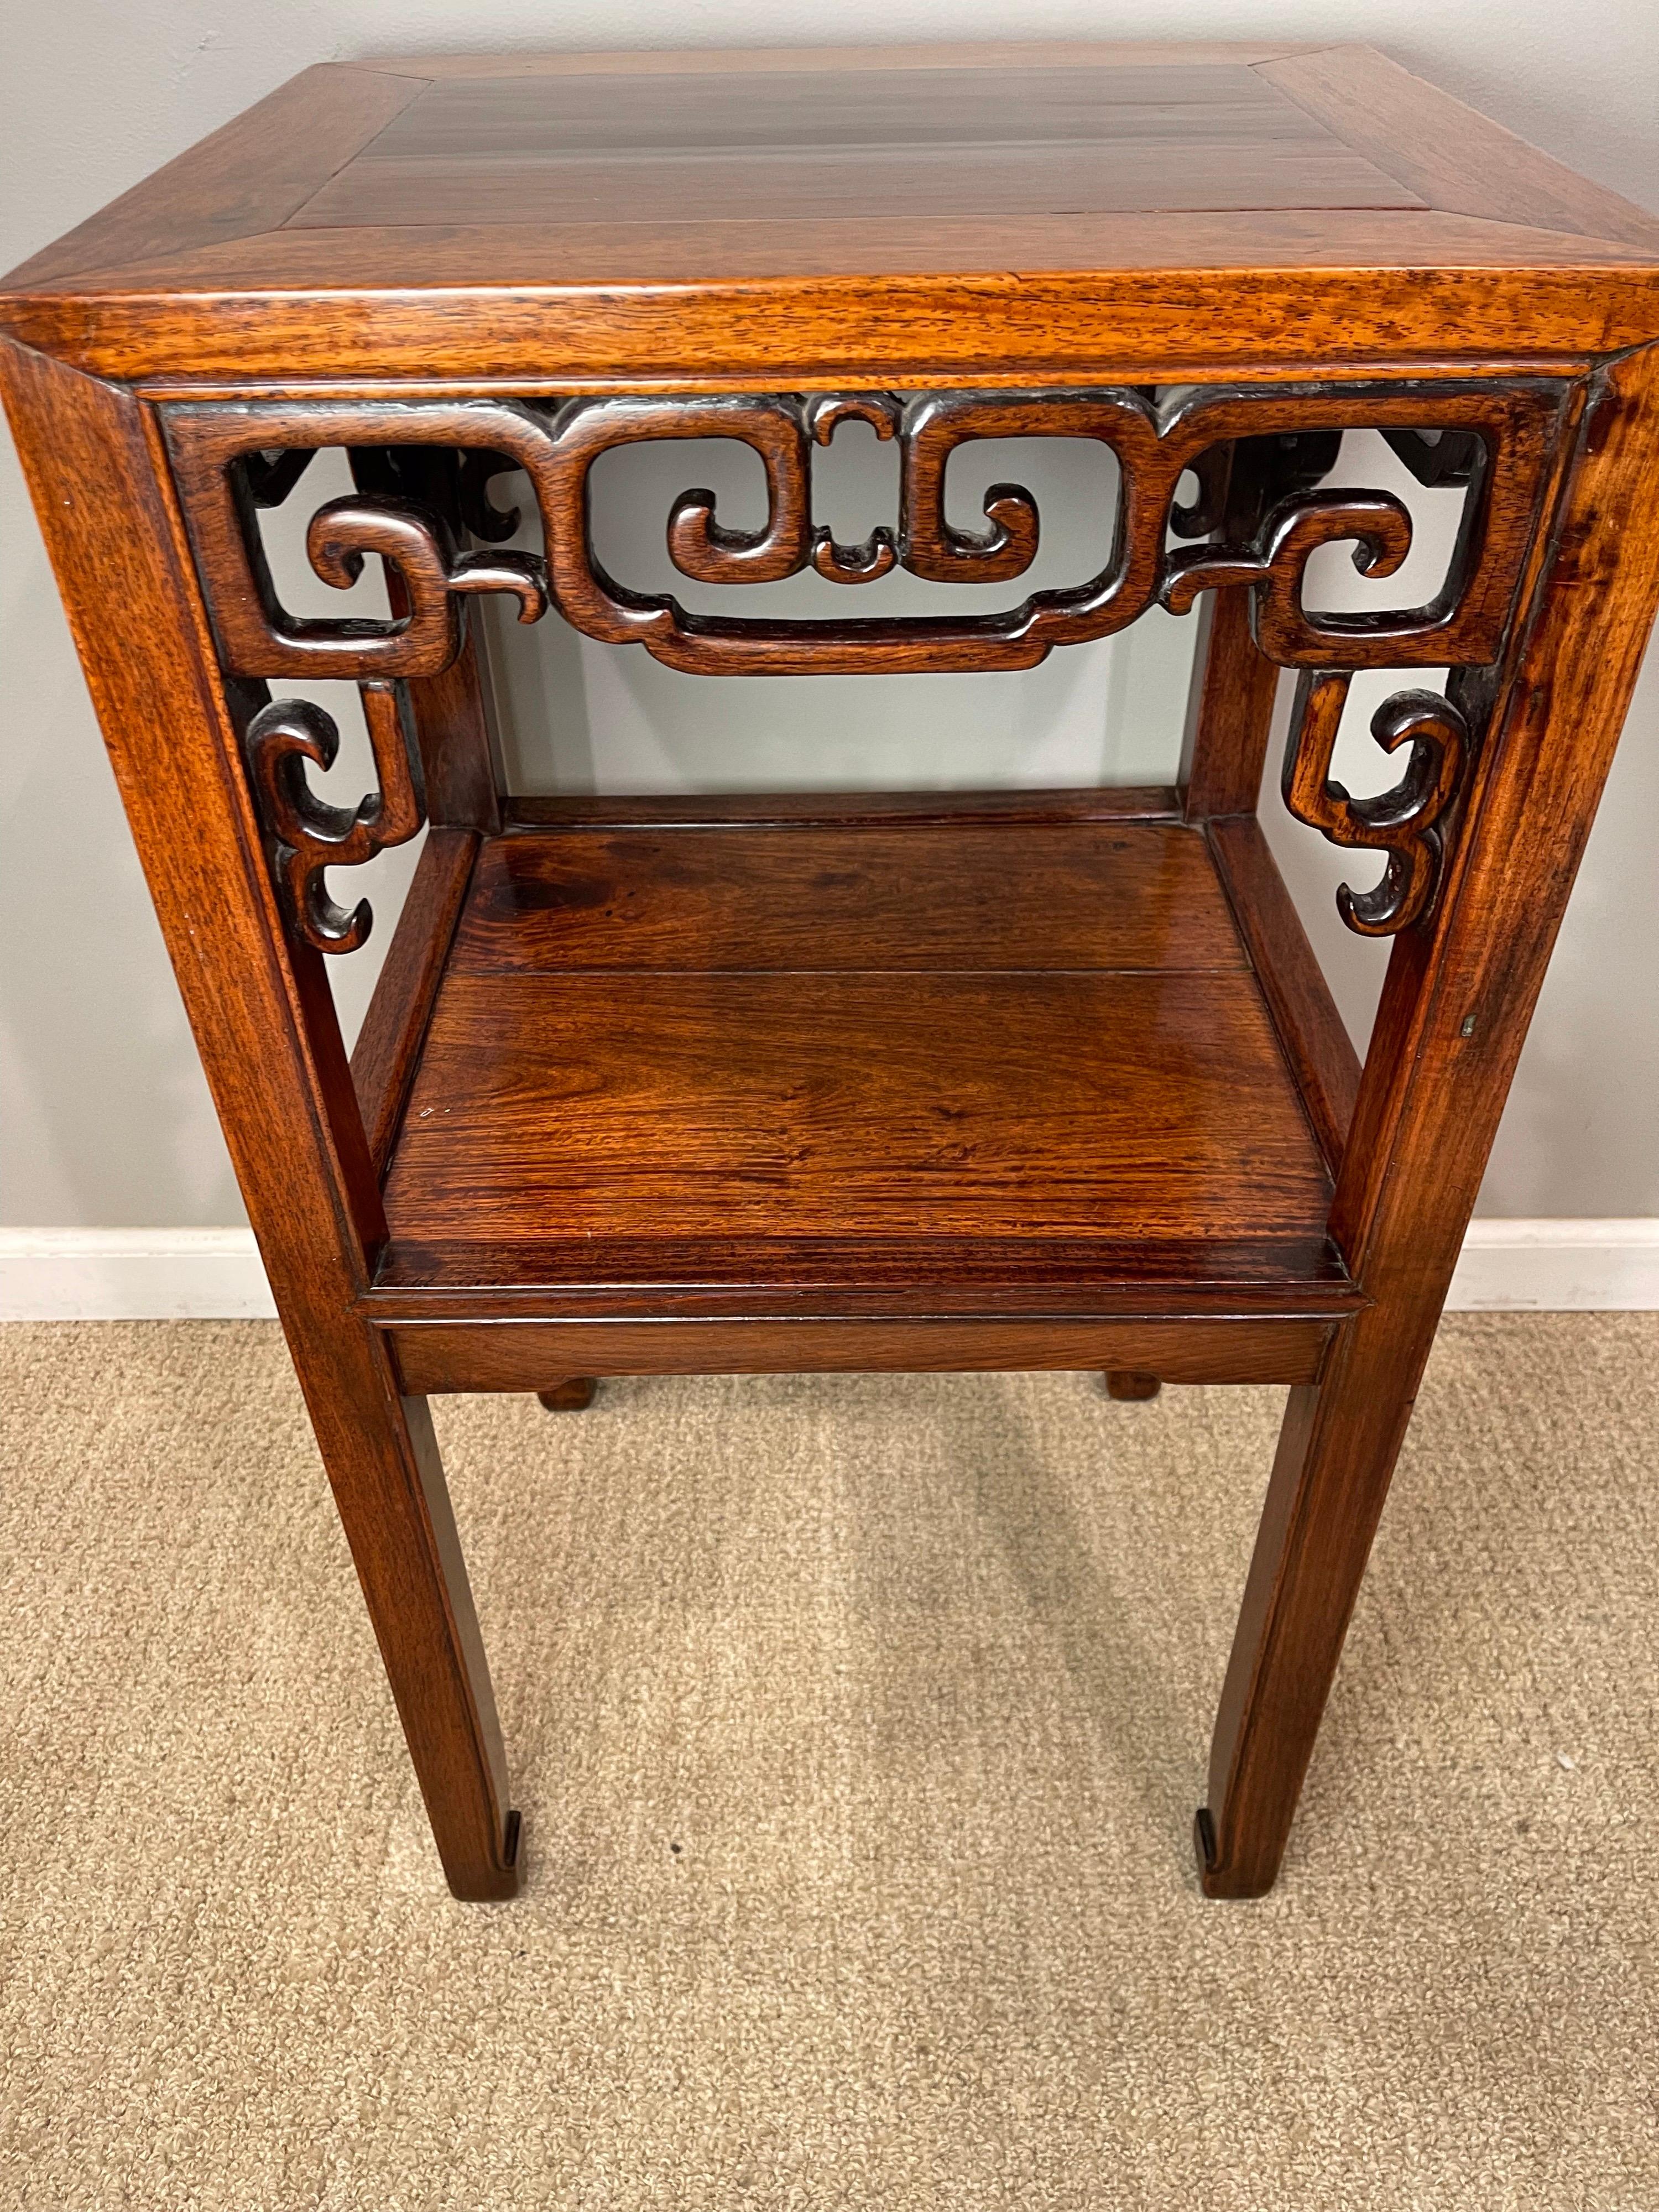 Chinese Hardwood (Hungmu) Tea Table, Late 19th Century / Early 20th Century 
Having exceptional color 
It's Top above with carved scrolled brackets below & lower shelf.

 